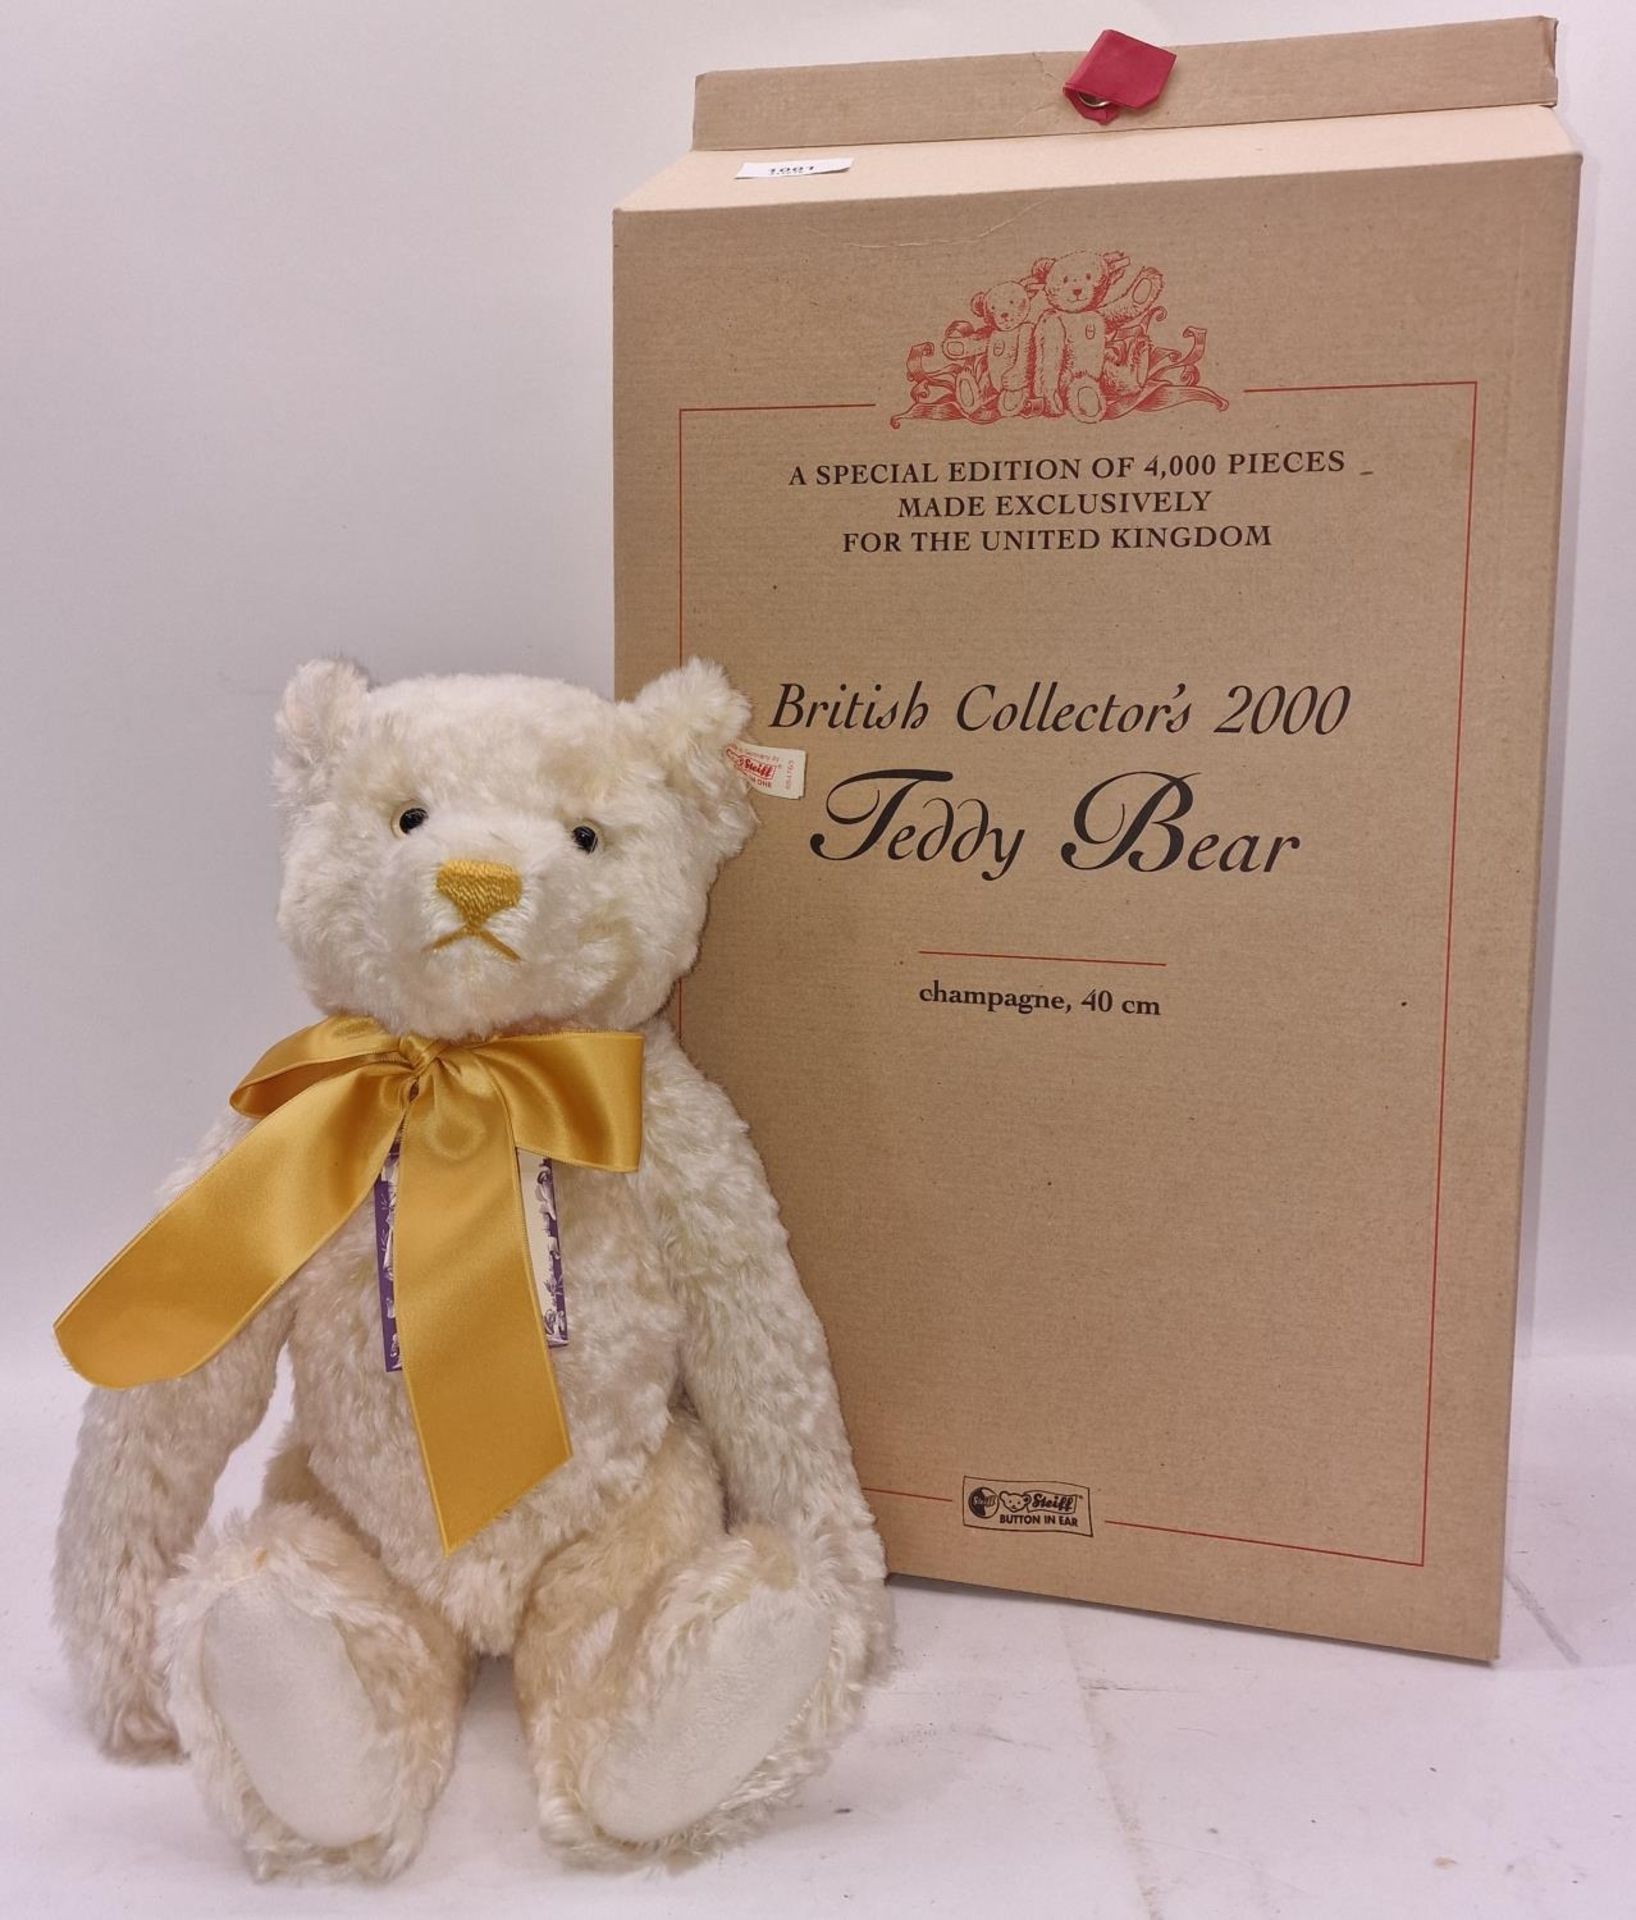 Steiff Limited edition 639/4000 British Collector's Teddy Bear 2000 champagne 40cm. Boxed with